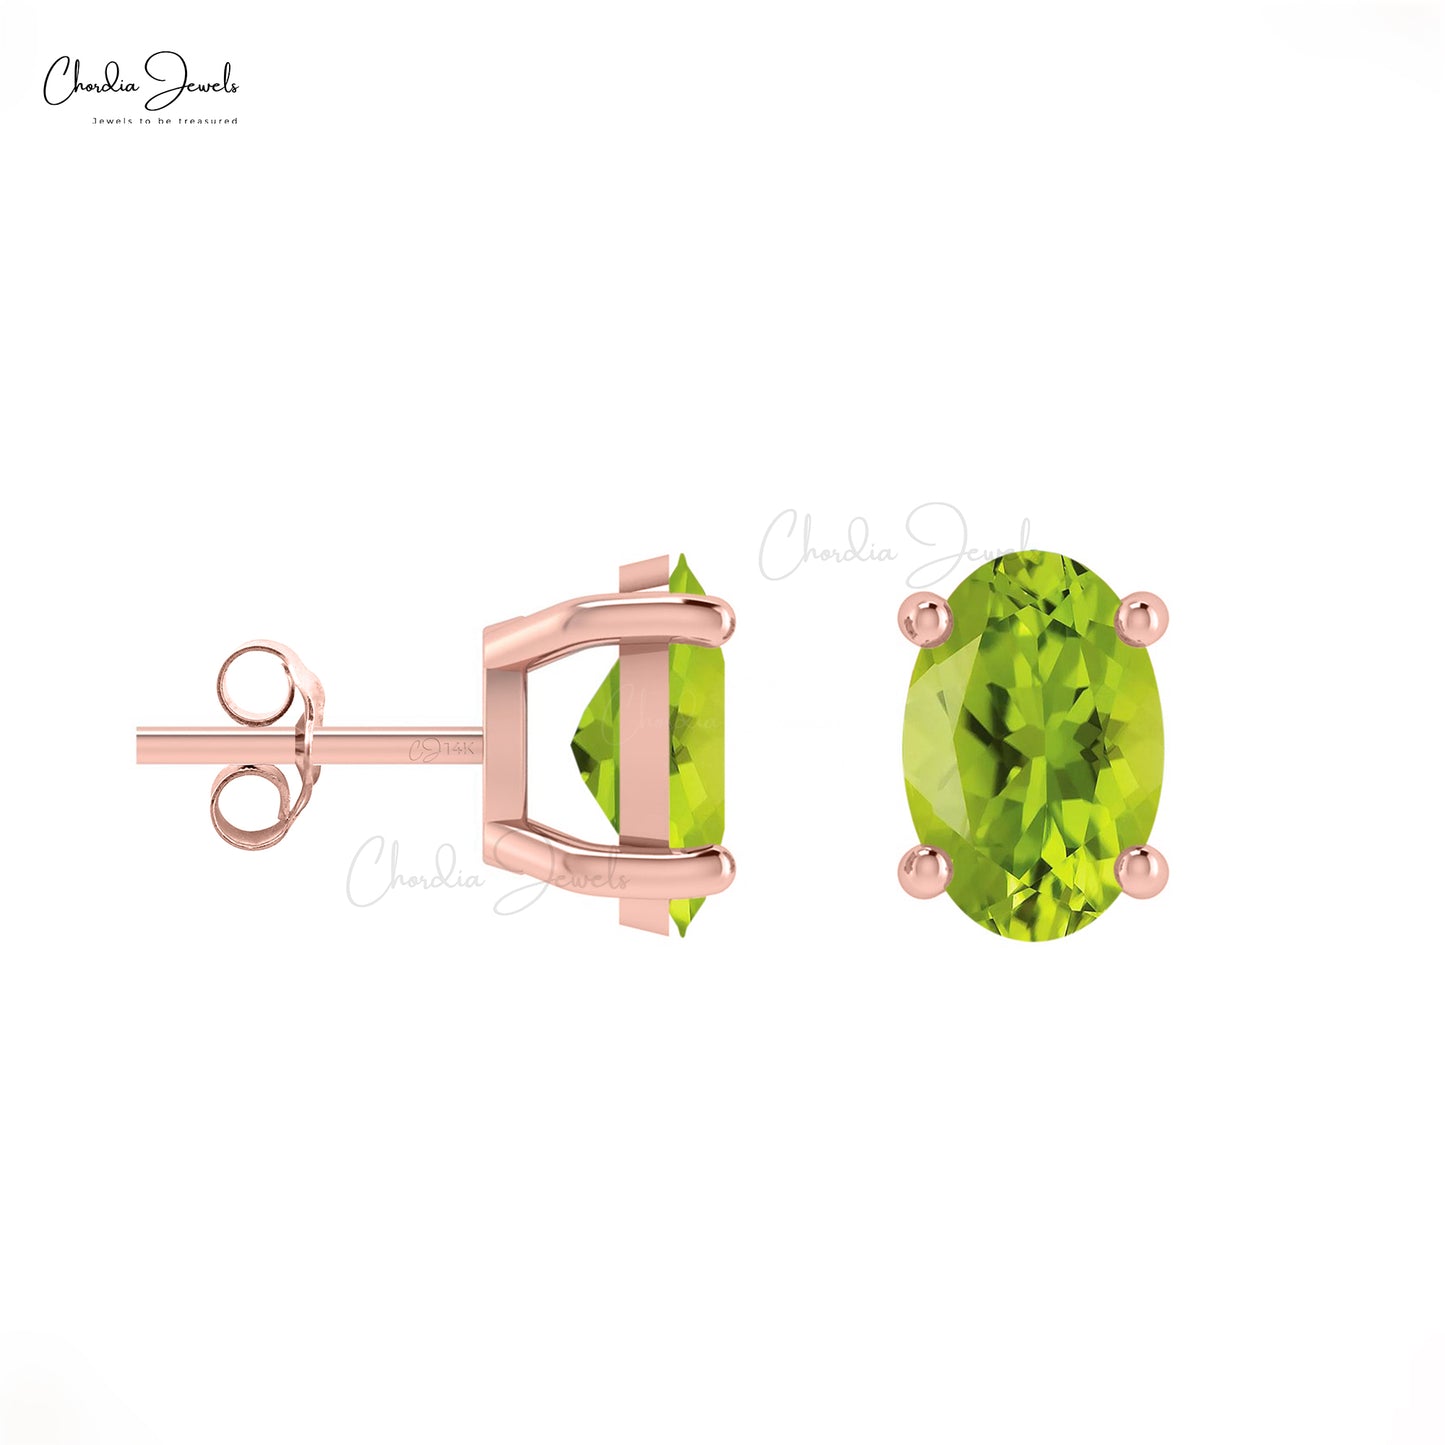 Prong Set 1.44ct Peridot Solitaire Studs 14k Real Gold Light Weight Gemstone Stud Earrings